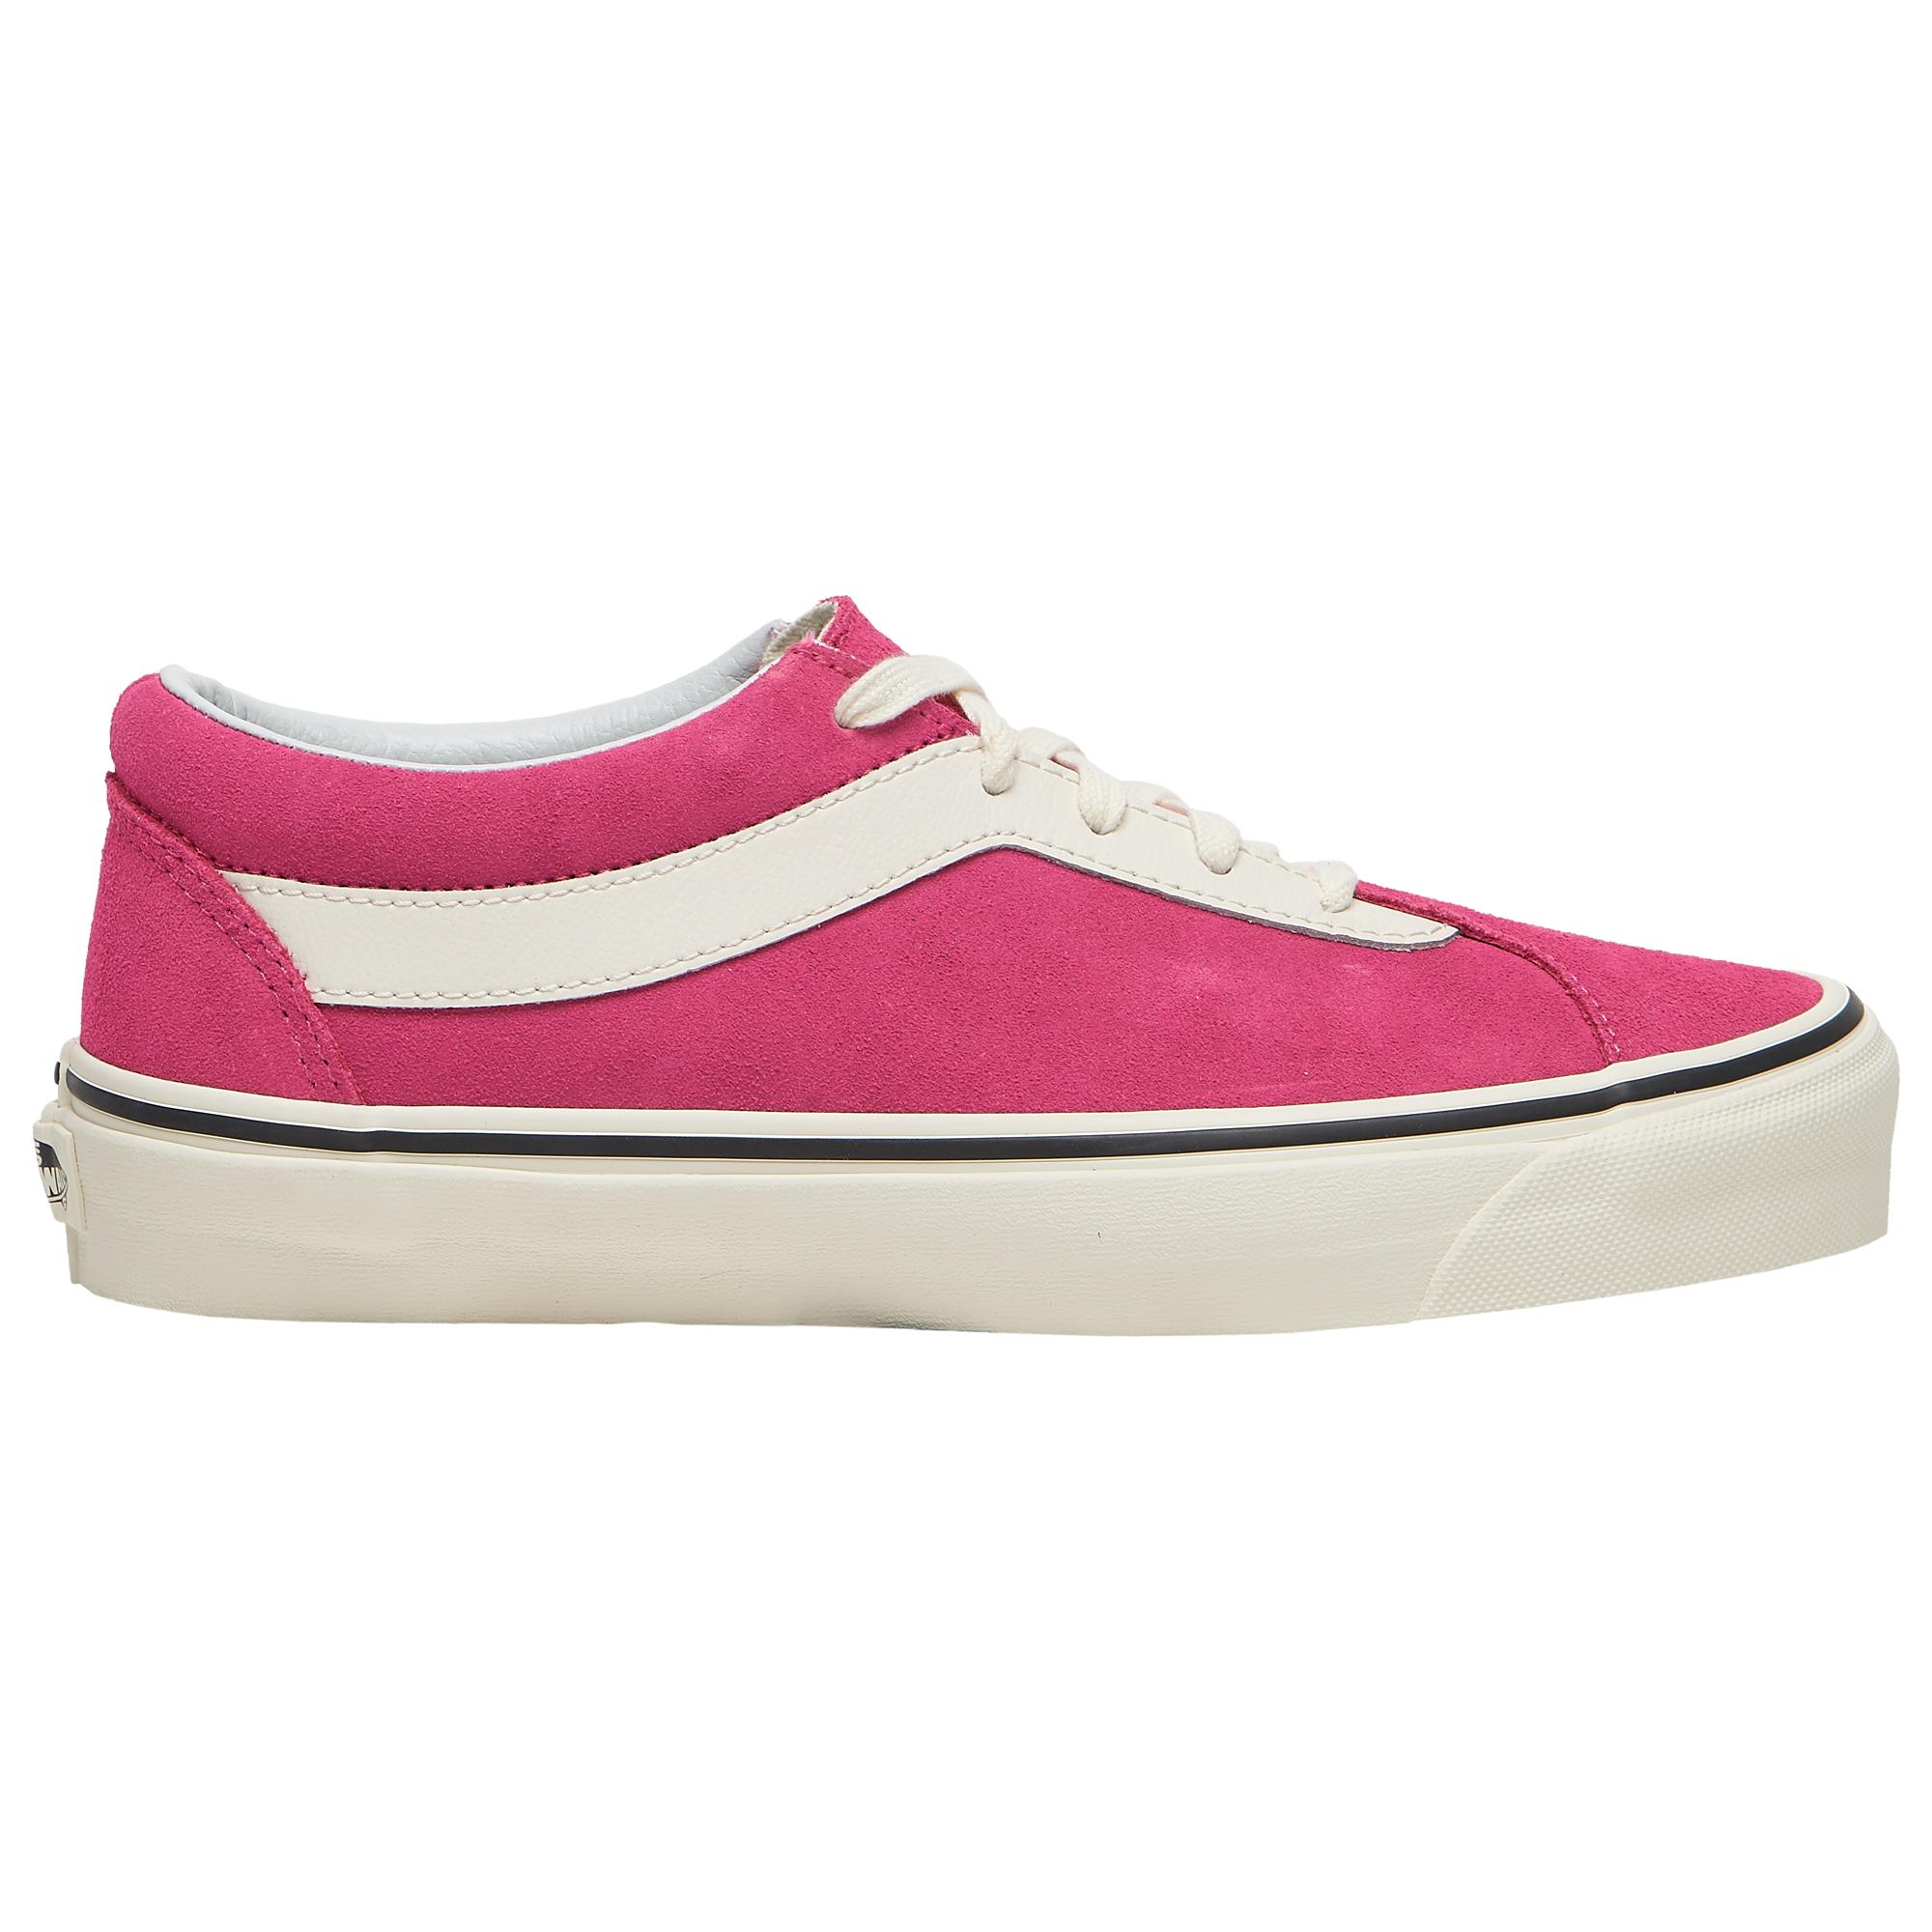 Vans Suede Bold Ni Skate/bmx Shoes in Pink - Lyst